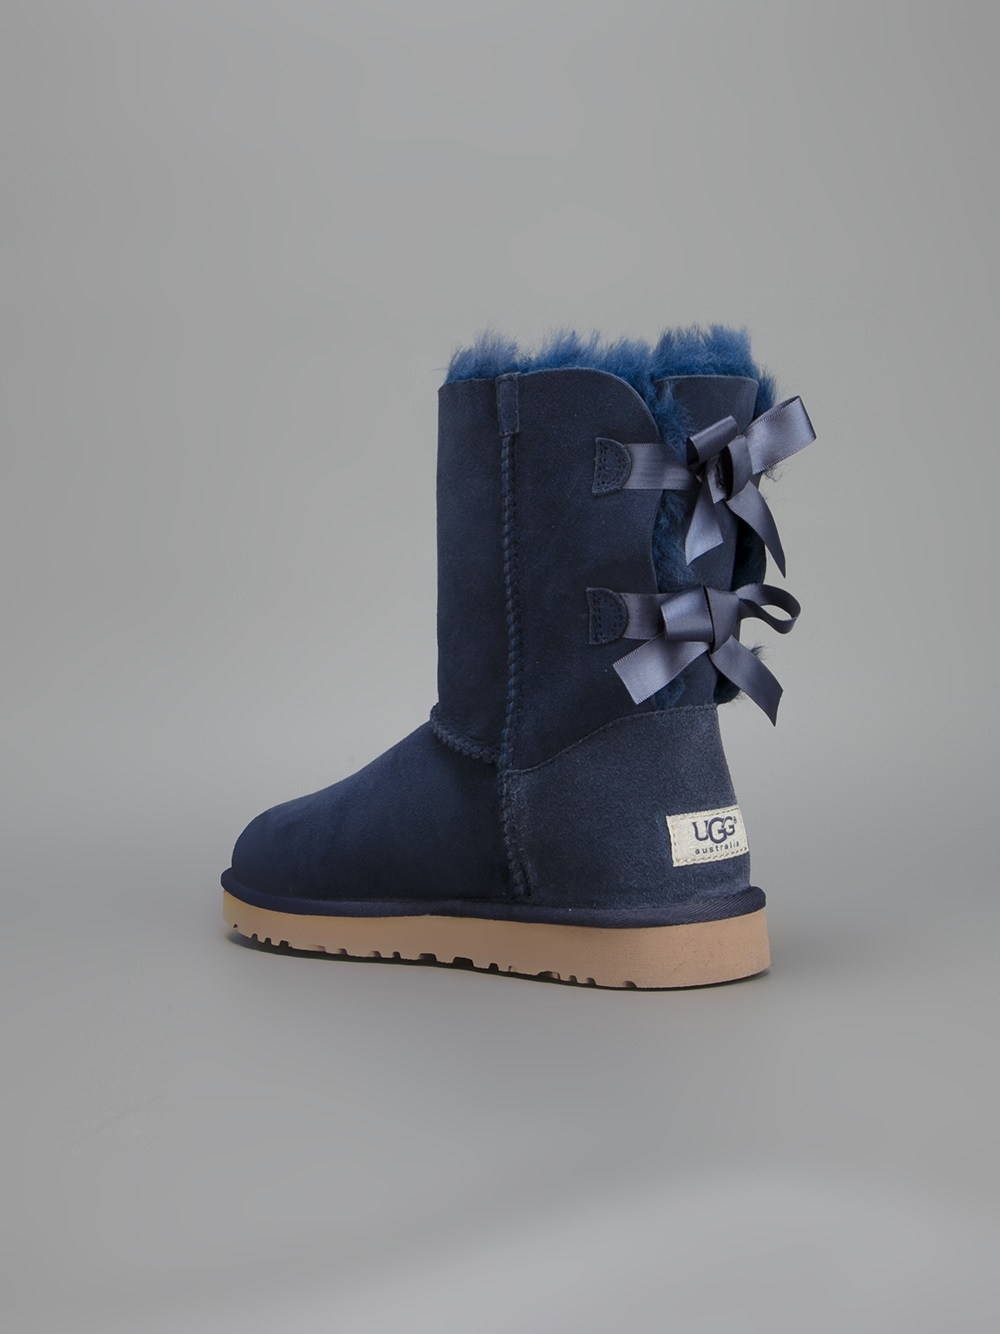 blue ugg boots with bows